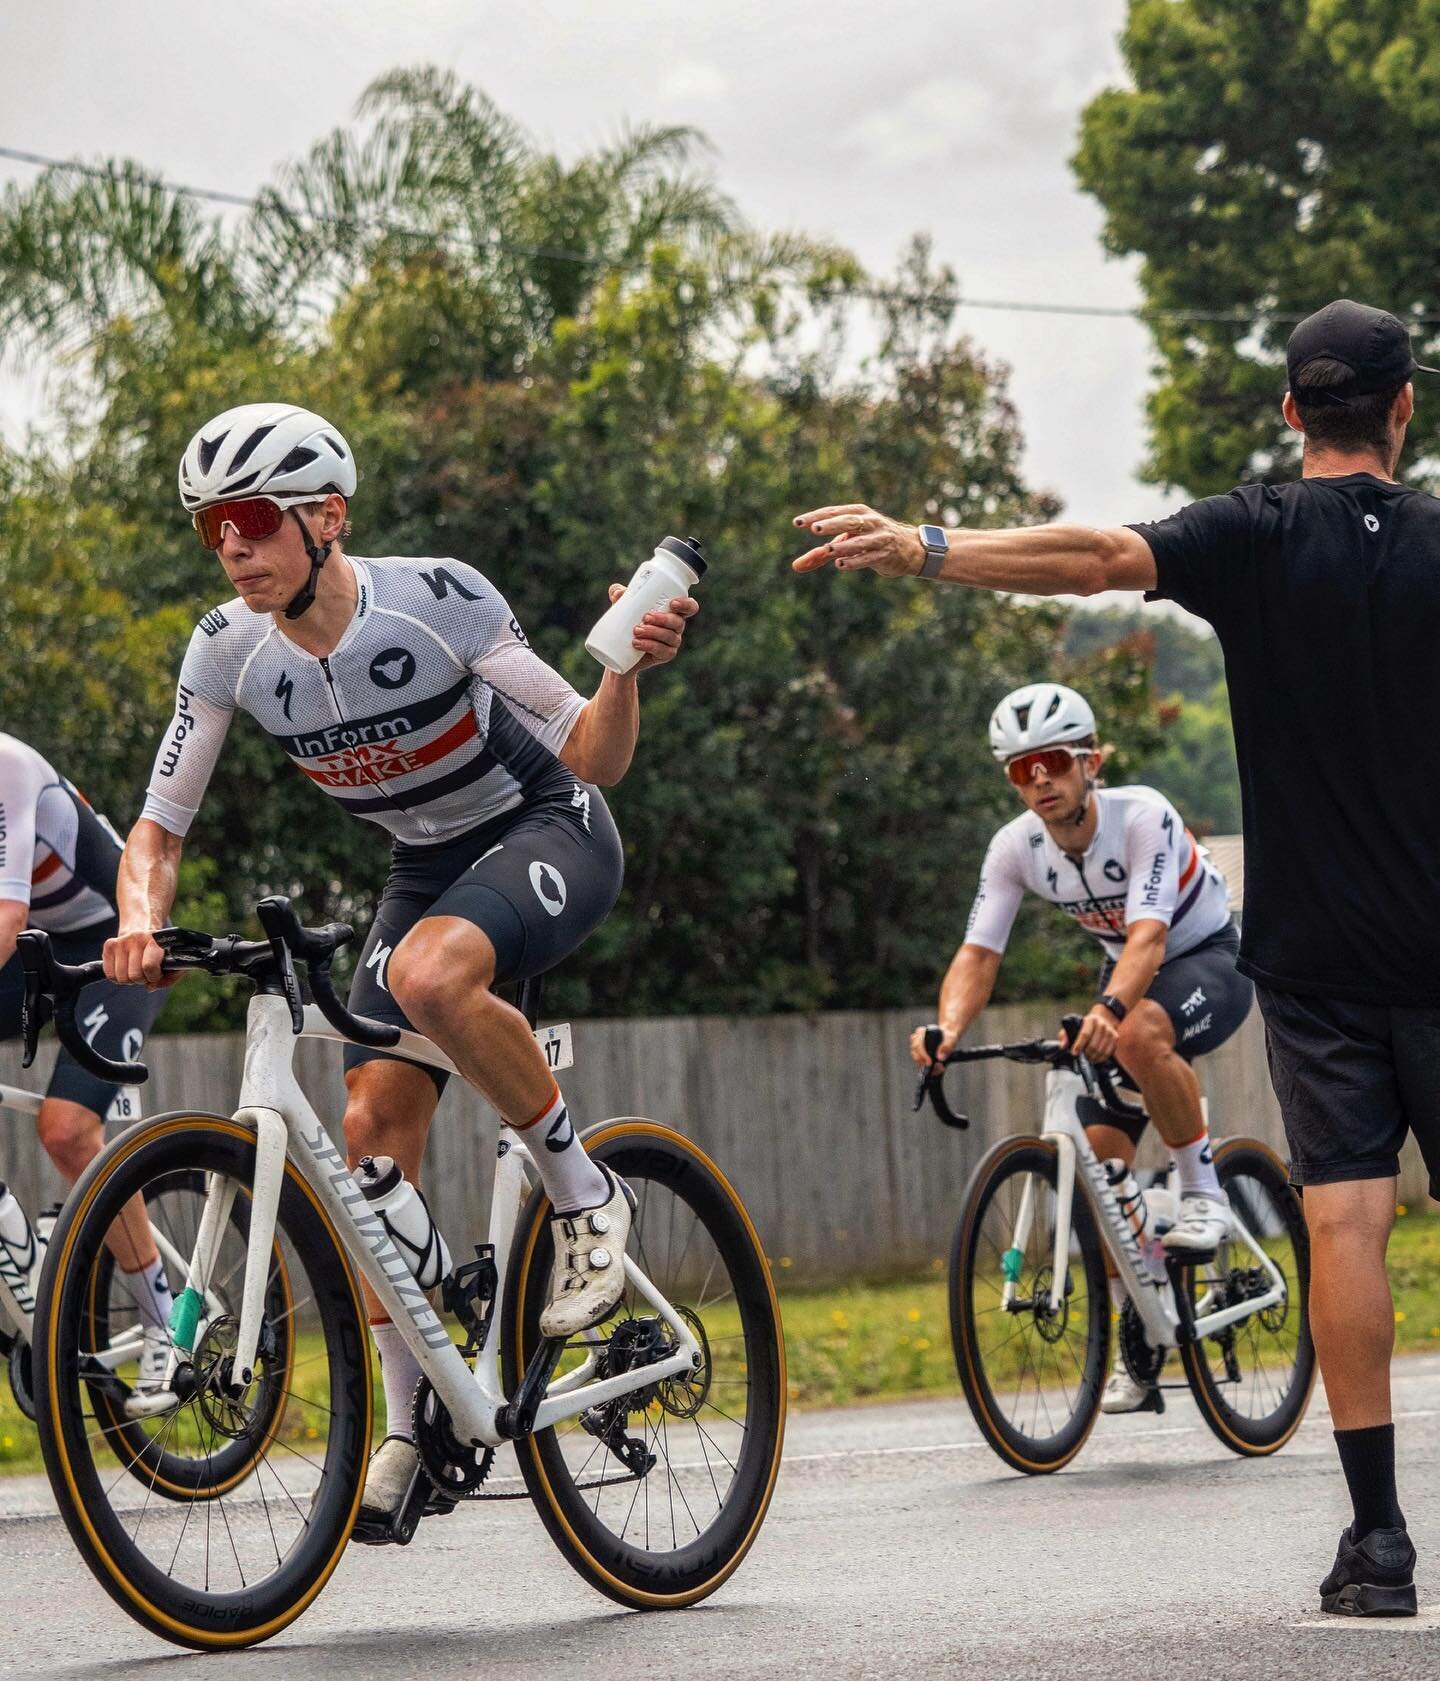 Stage Four @cyclesunshinecoast22 with the Men&rsquo;s team. The team rode strong together through the entire race. An unfortunate crash with 3km to go brought down some of the team. However, @graeme.frislie caught hard to finish in second place just 